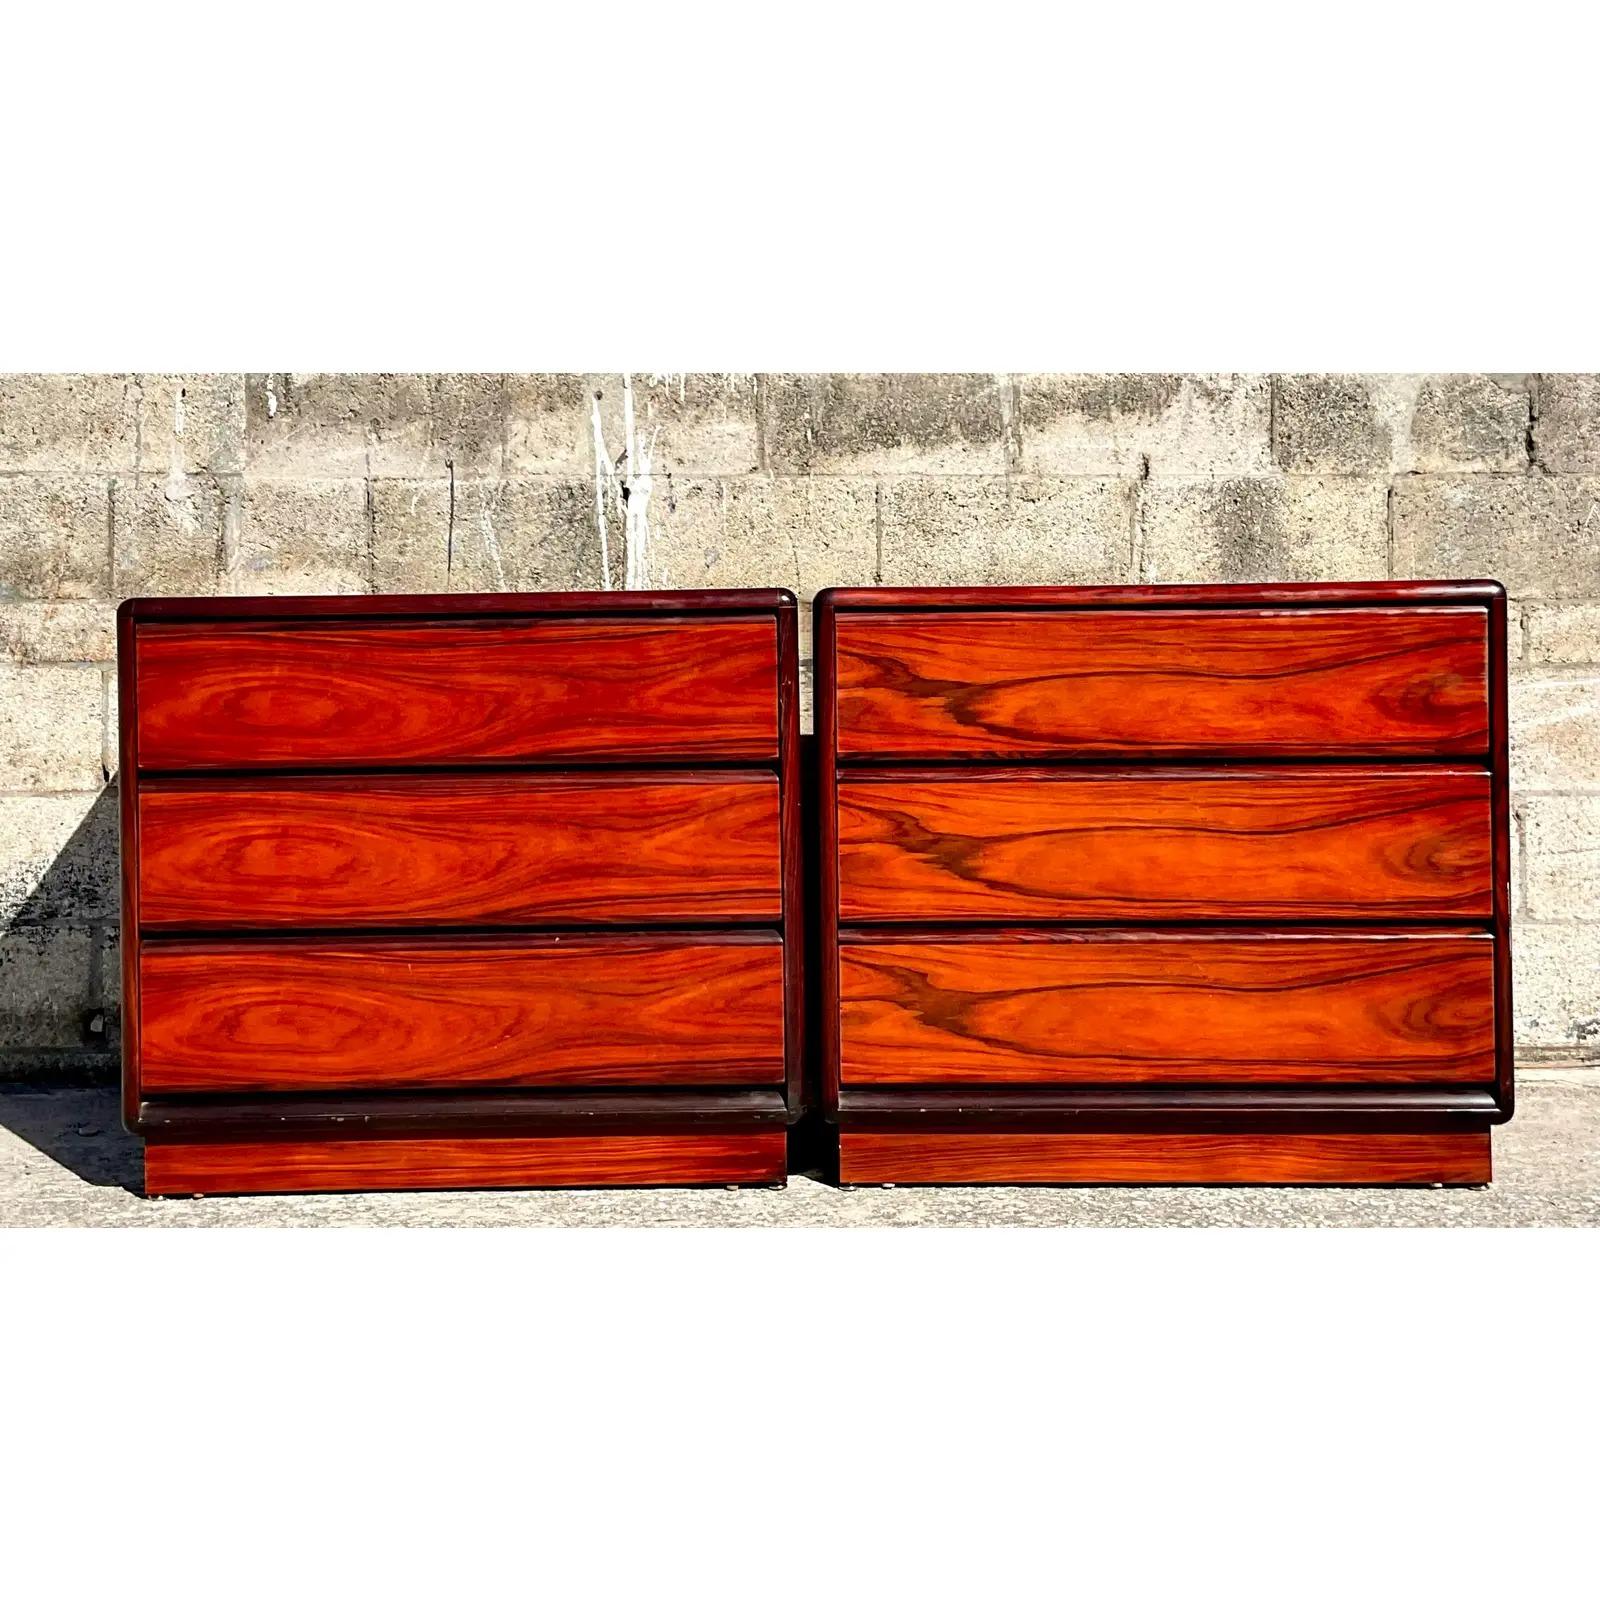 Danish Vintage Mid-Century Modern Brouer Rosewood Chest of Drawers - a Pair For Sale